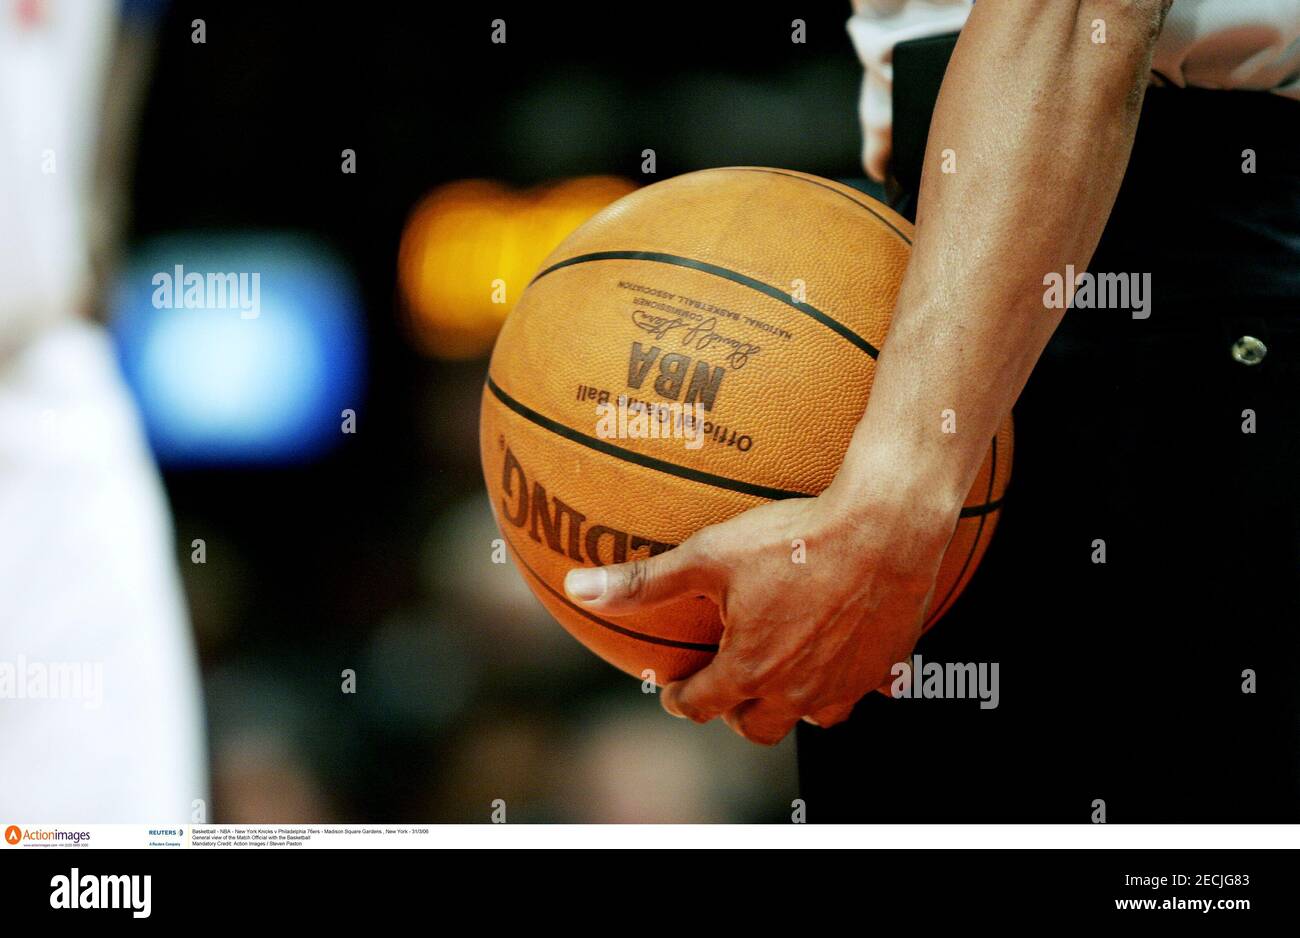 Basketball - NBA - New York Knicks v Philadelphia 76ers - Madison Square  Gardens , New York - 31/3/06 General view of the Match Official with the  Basketball Mandatory Credit: Action Images / Steven Paston Stock Photo -  Alamy